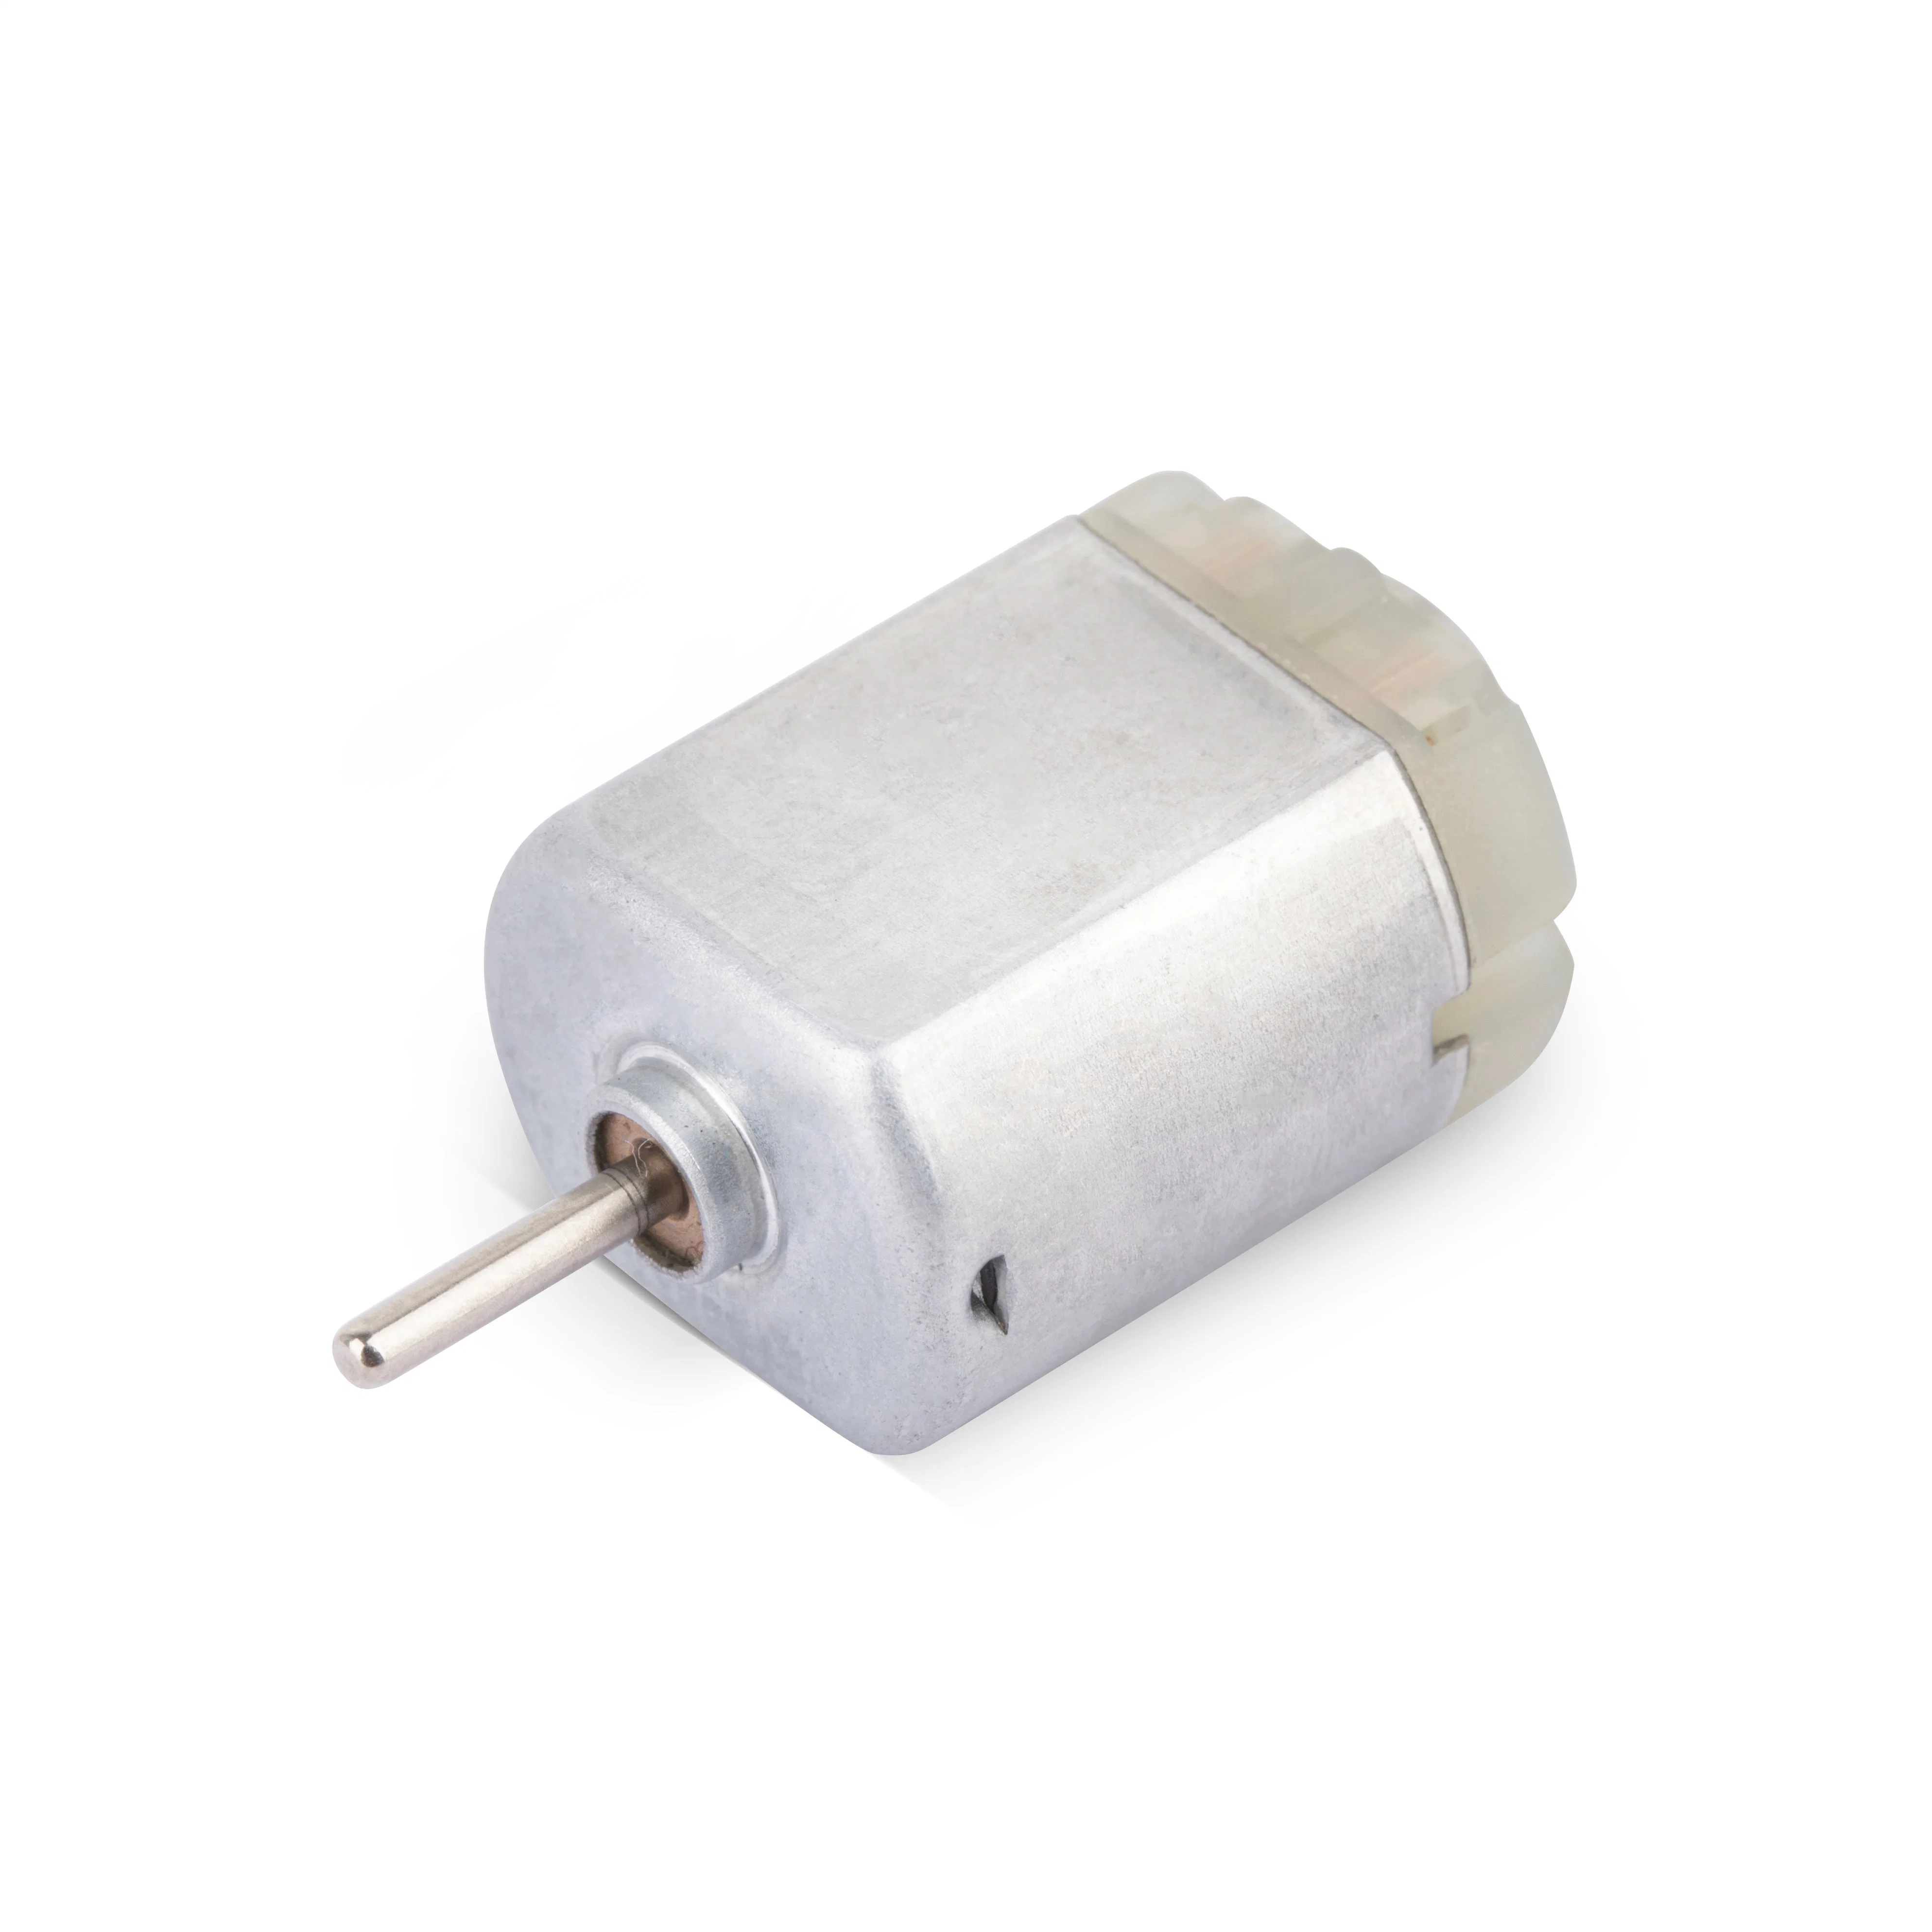 Kinmore 12 Volt DC Motor Electric Vehicle DC Motors DC Electric Motor Stable Performance